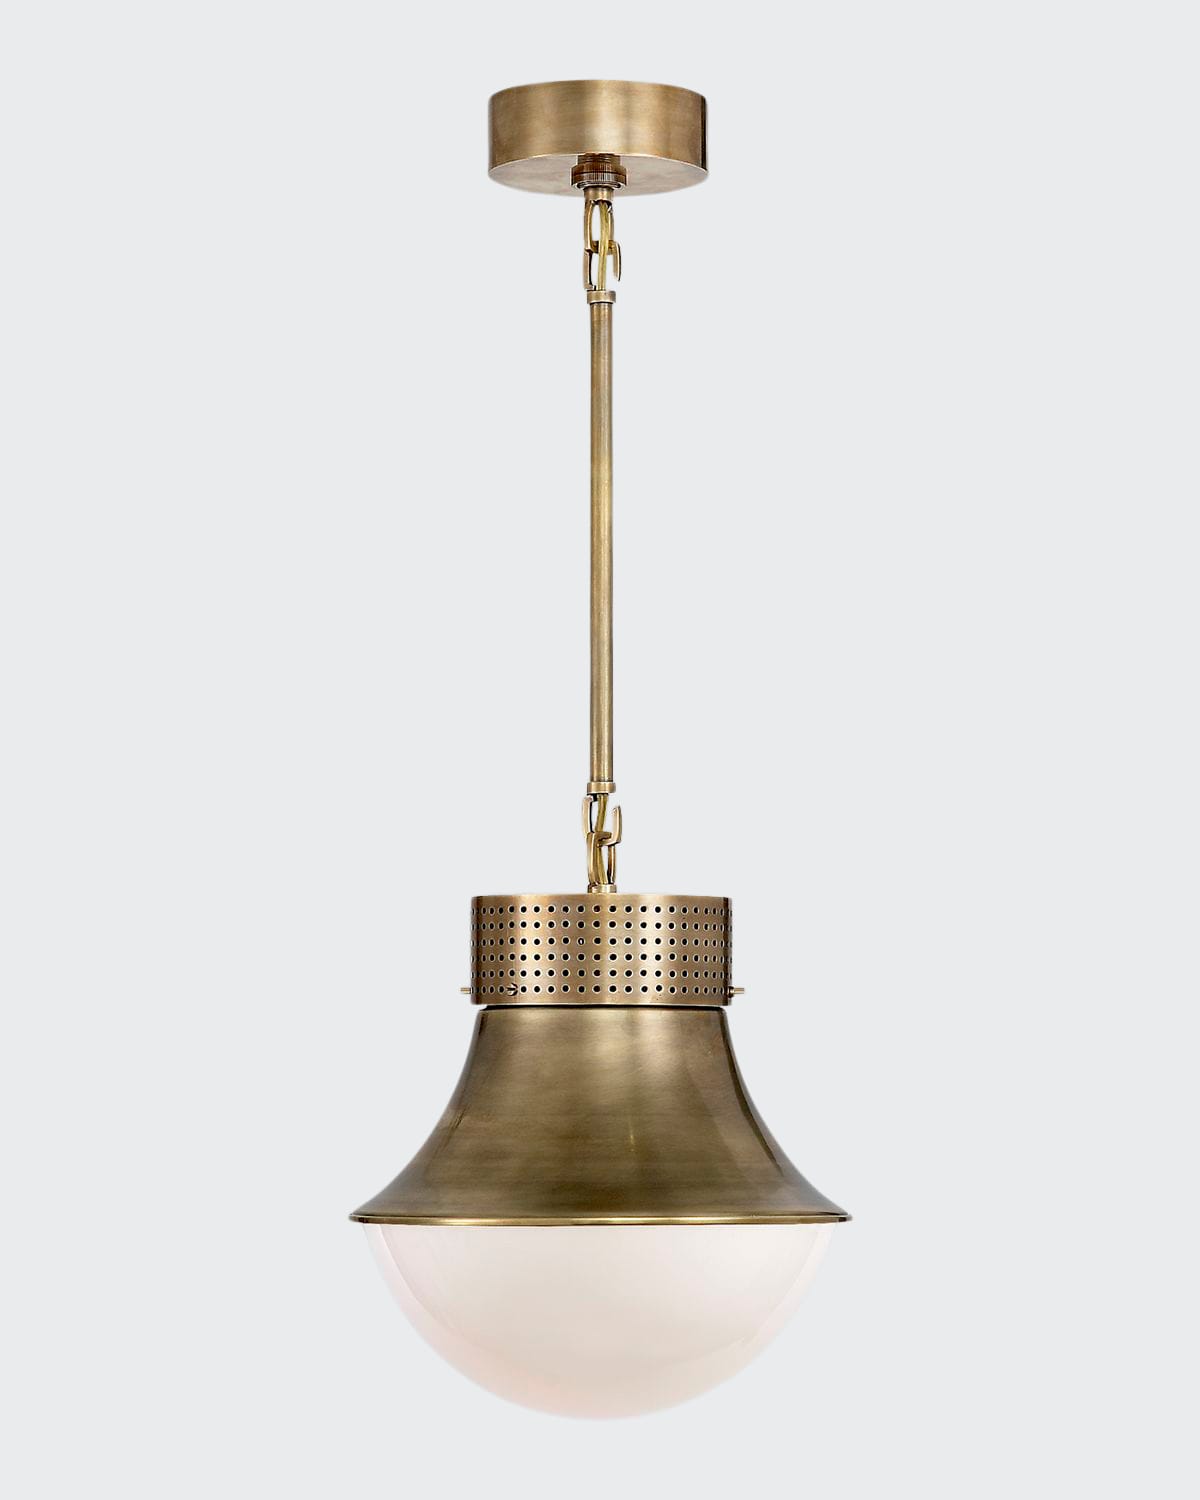 Kelly Wearstler For Visual Comfort Signature Precision Small Pendant In Antique Brass